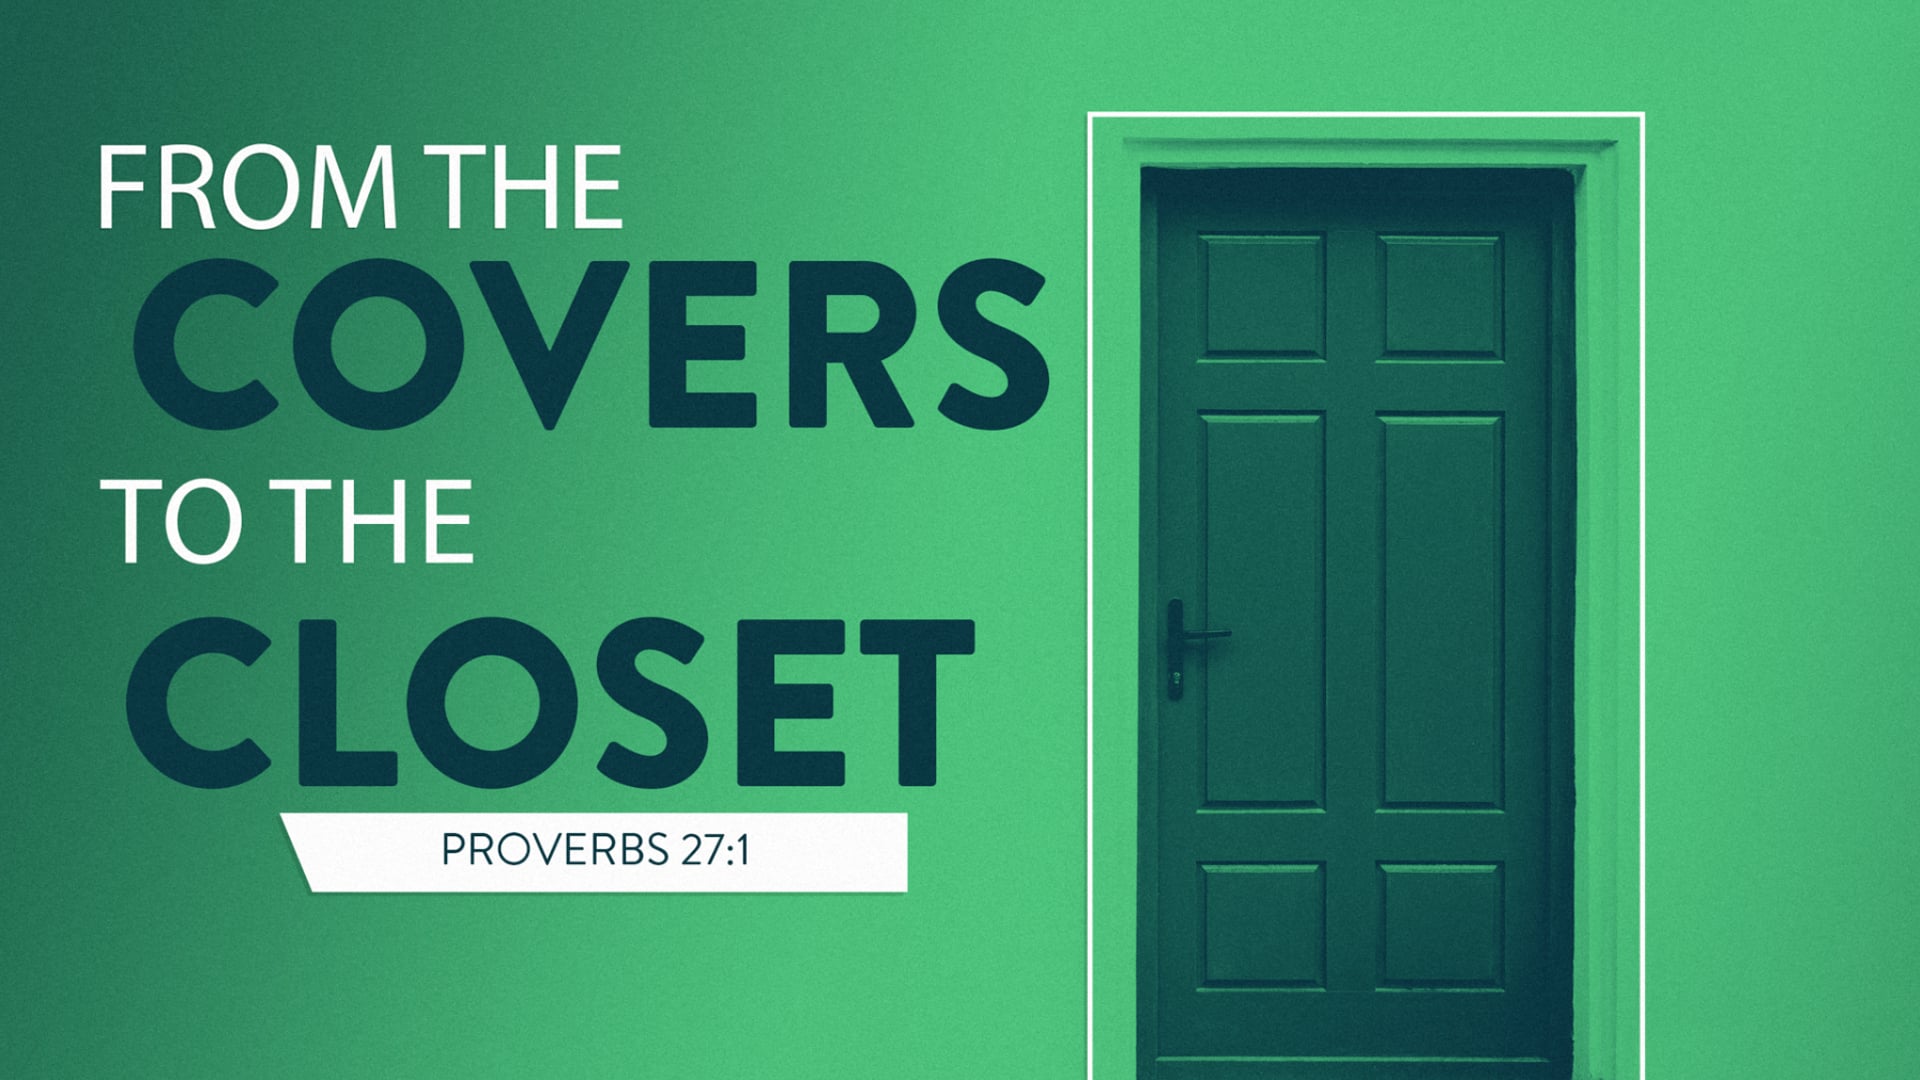 Proverbs 27:1 (From the Covers to the Closet)